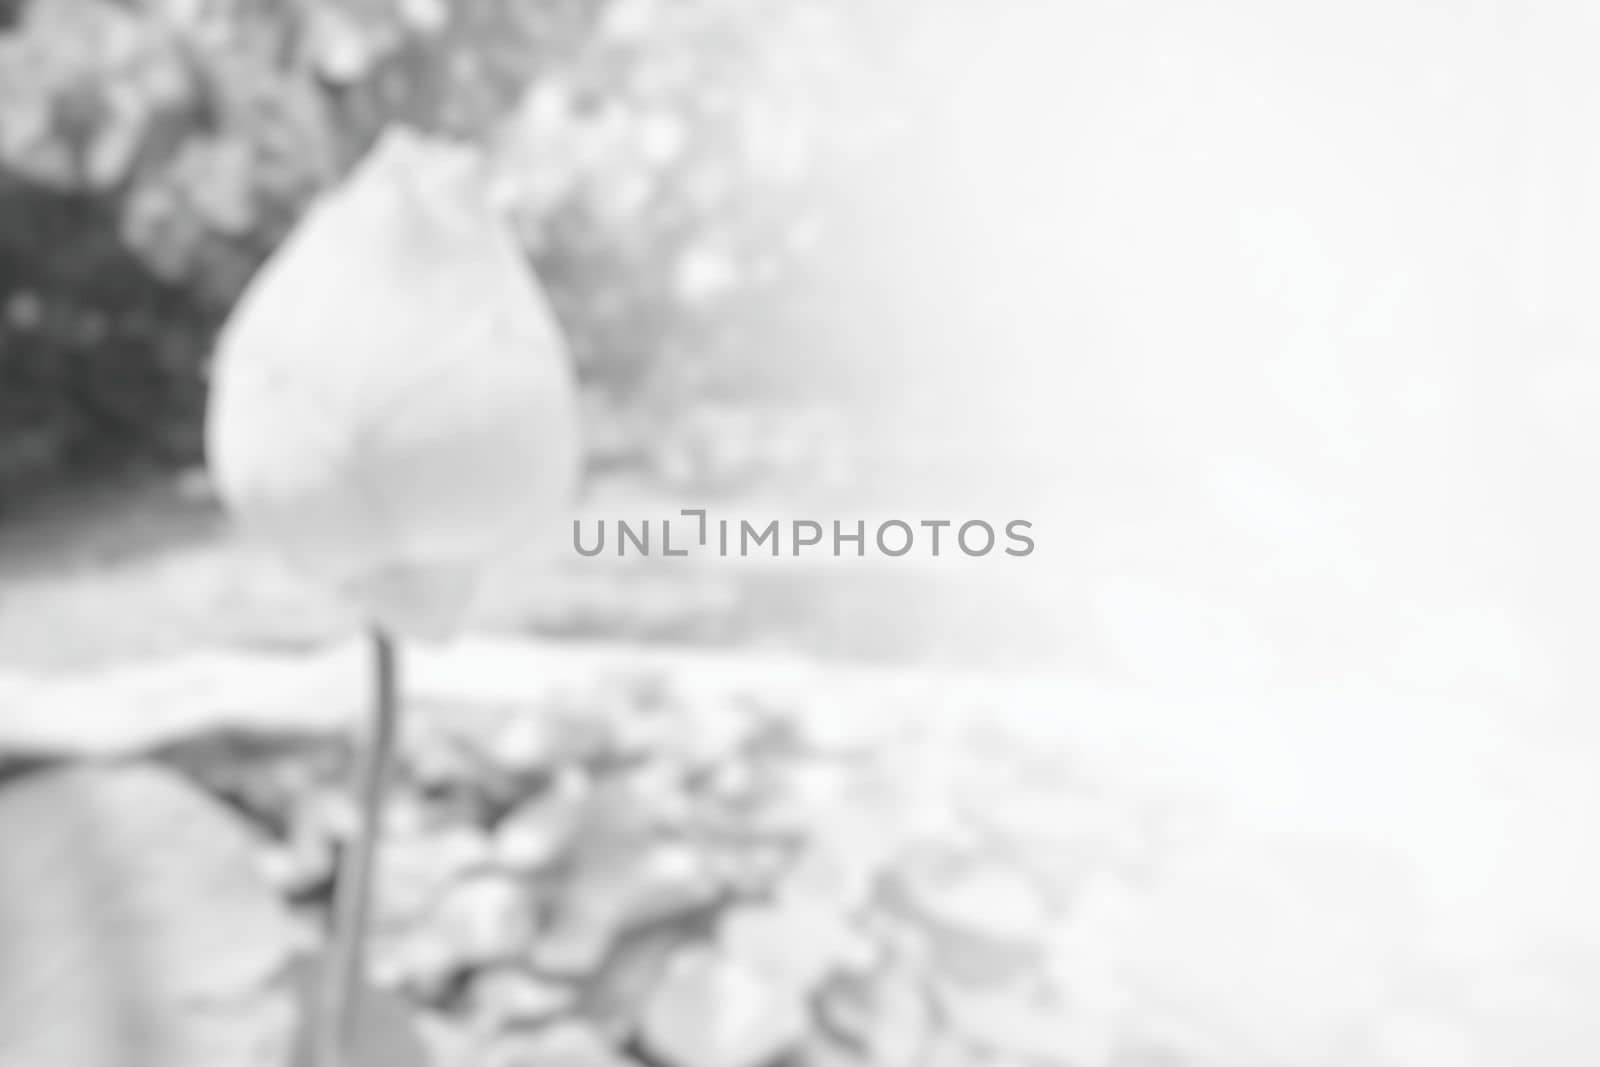 Blurred White Lotus in Pond Background with Light Leak Space for Text.